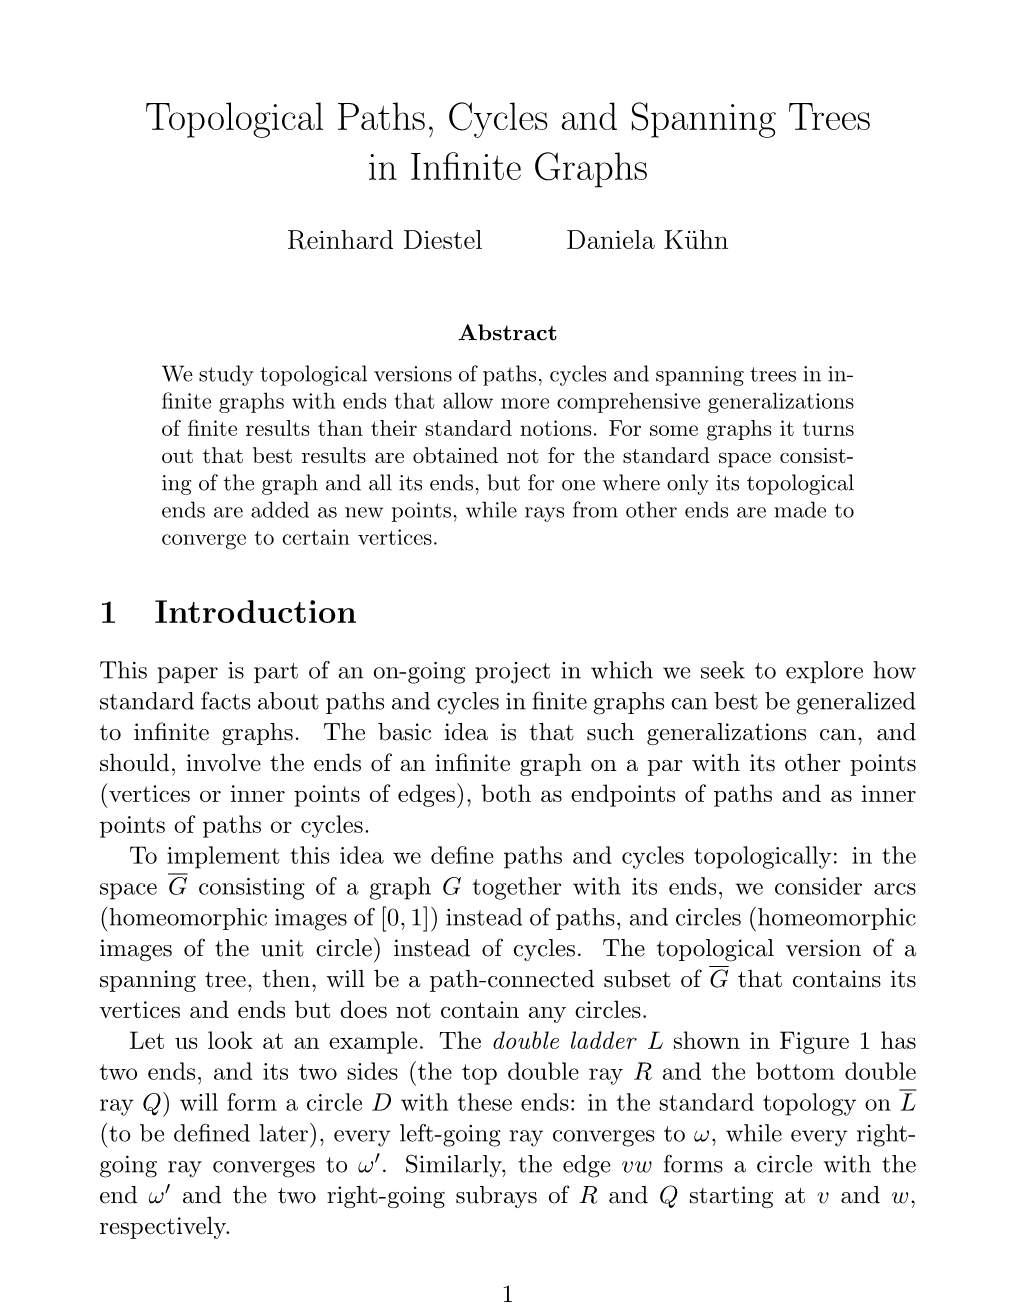 Topological Paths, Cycles and Spanning Trees in Infinite Graphs